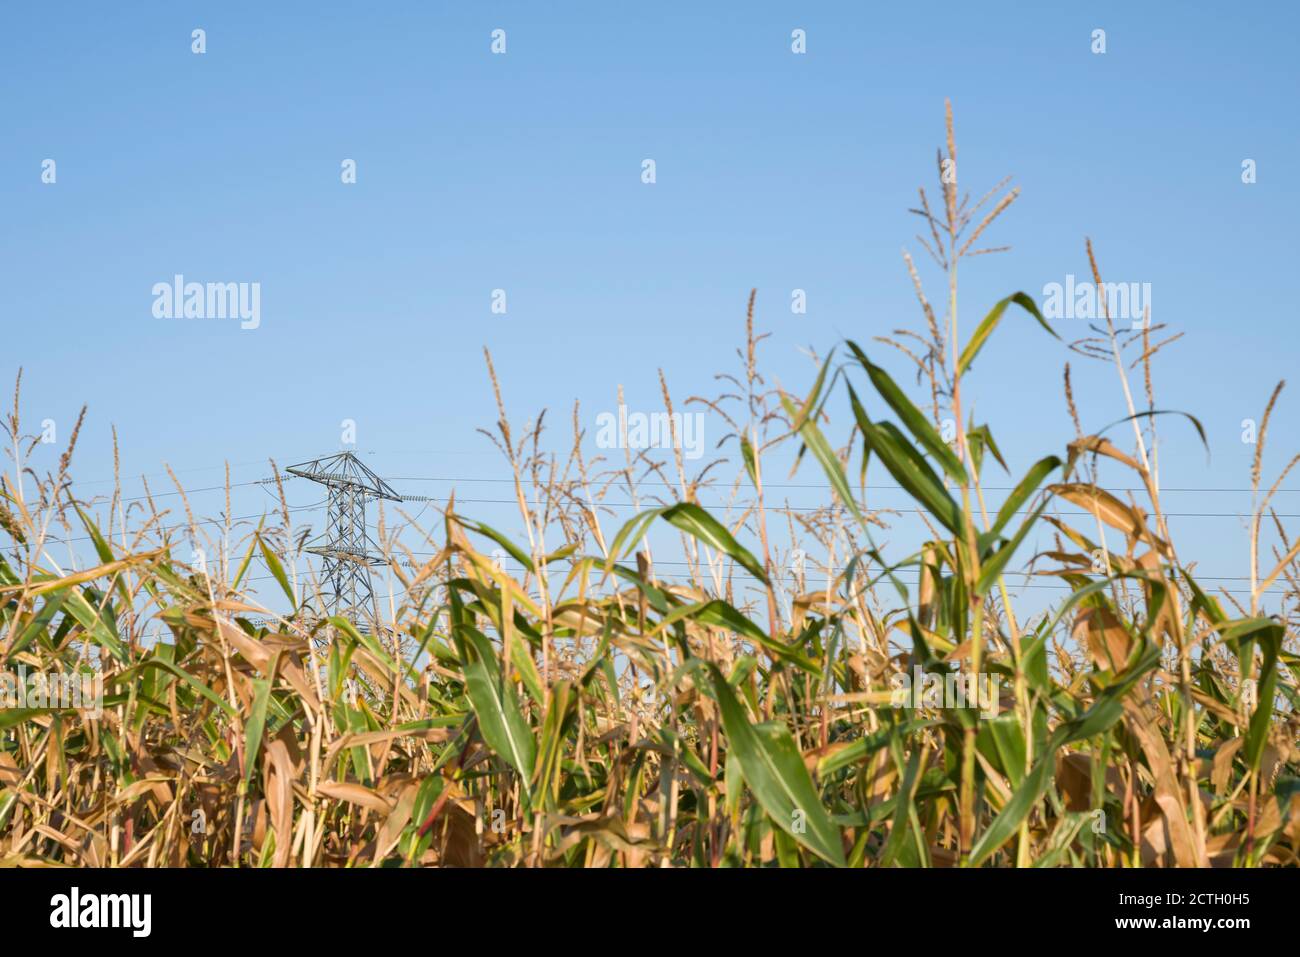 An electricity transmission tower against a clear blue sky viewed through ripening maise crops. Stock Photo